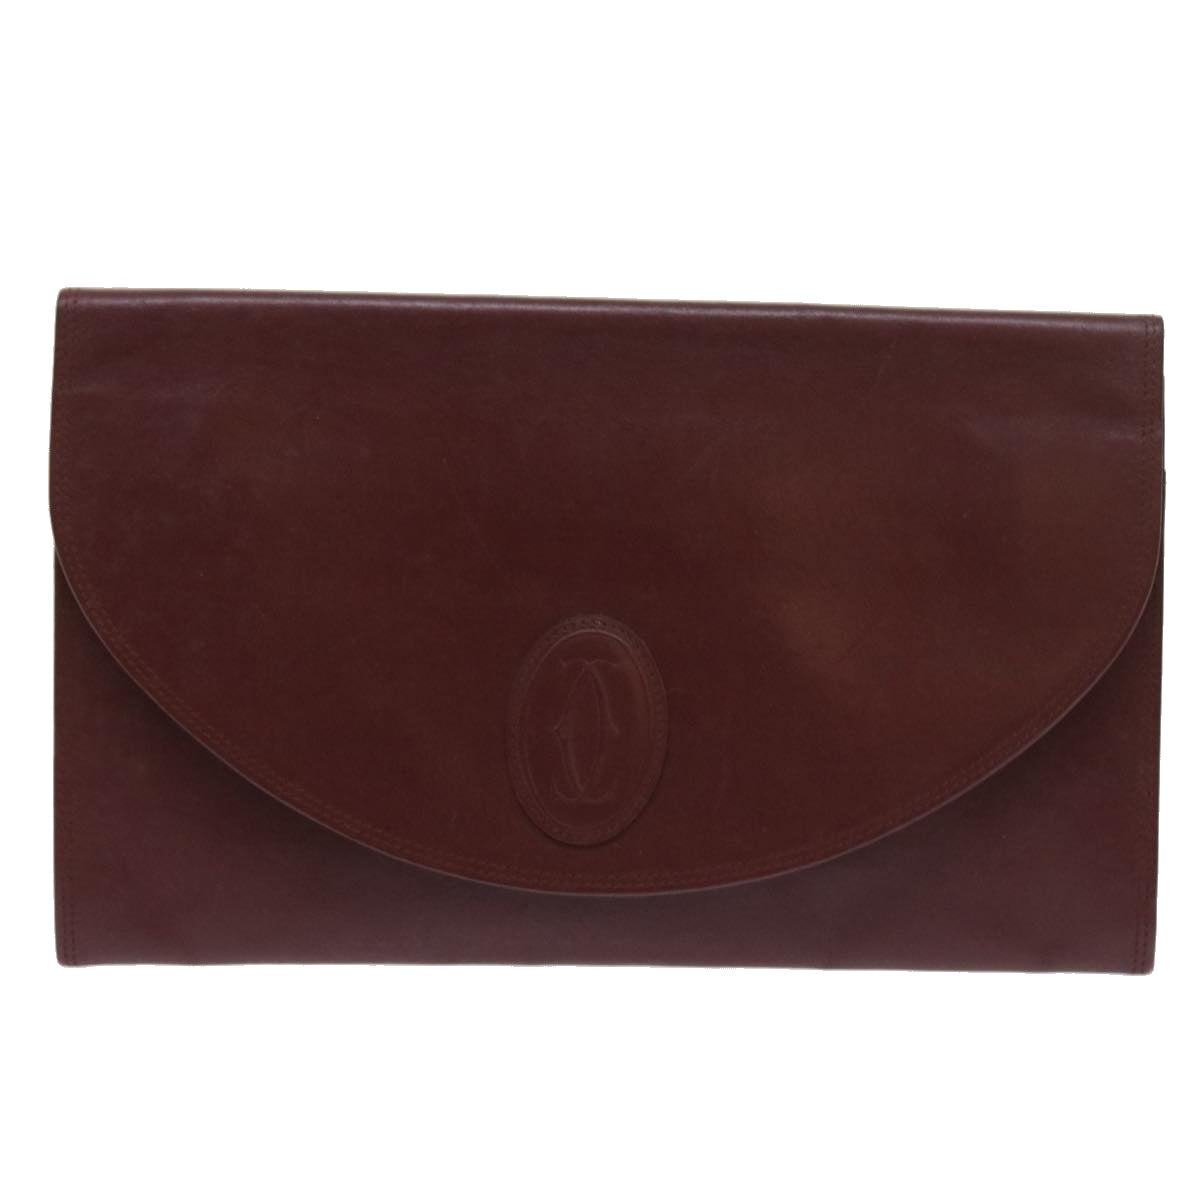 CARTIER Clutch Bag Leather Wine Red Auth ac2250 - 0